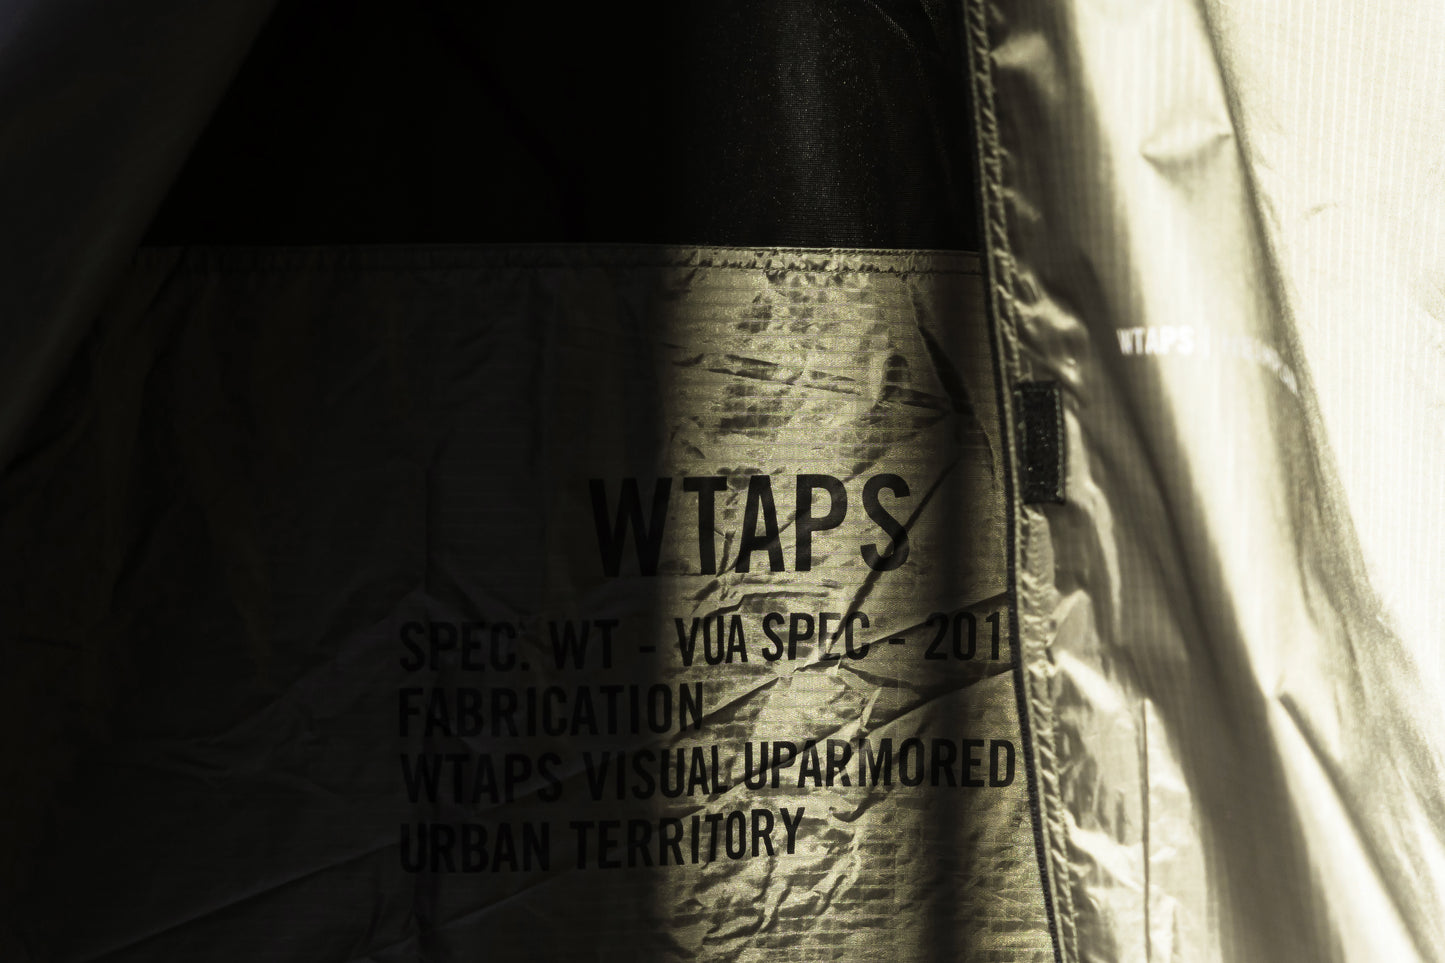 HEIMPLANET×WTAPS® – KIRRA Limited edition